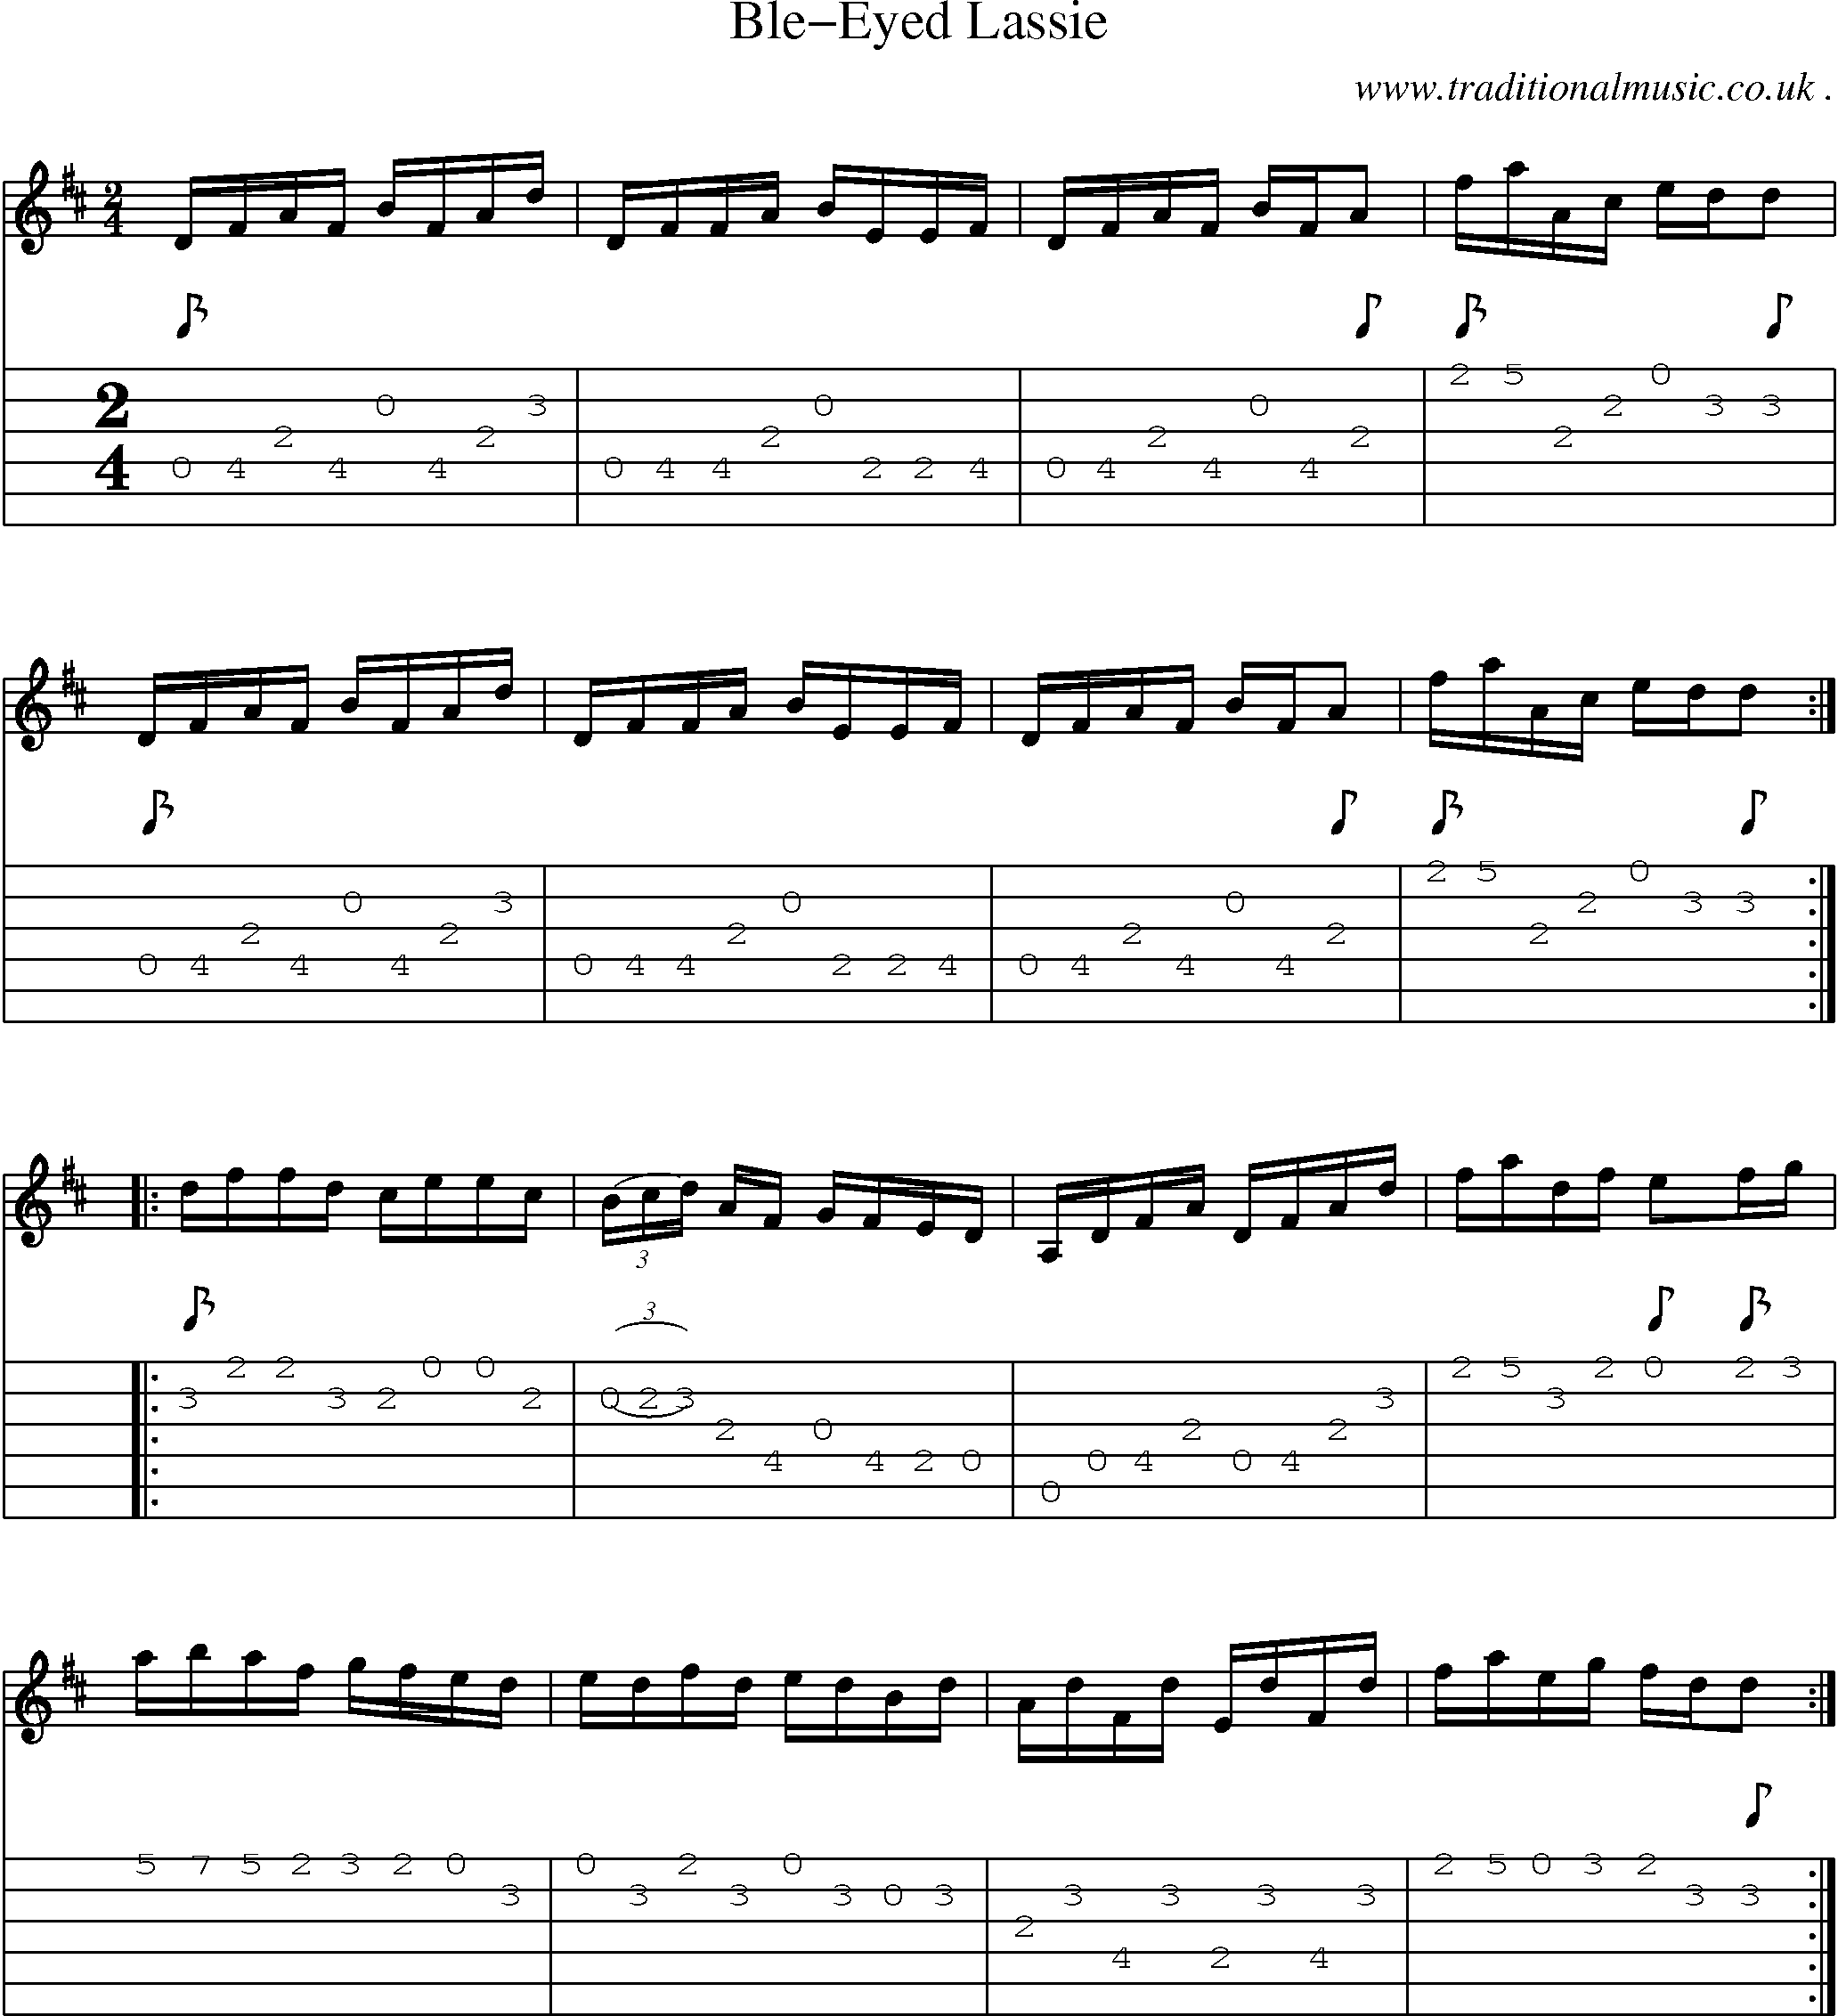 Sheet-Music and Guitar Tabs for Ble-eyed Lassie